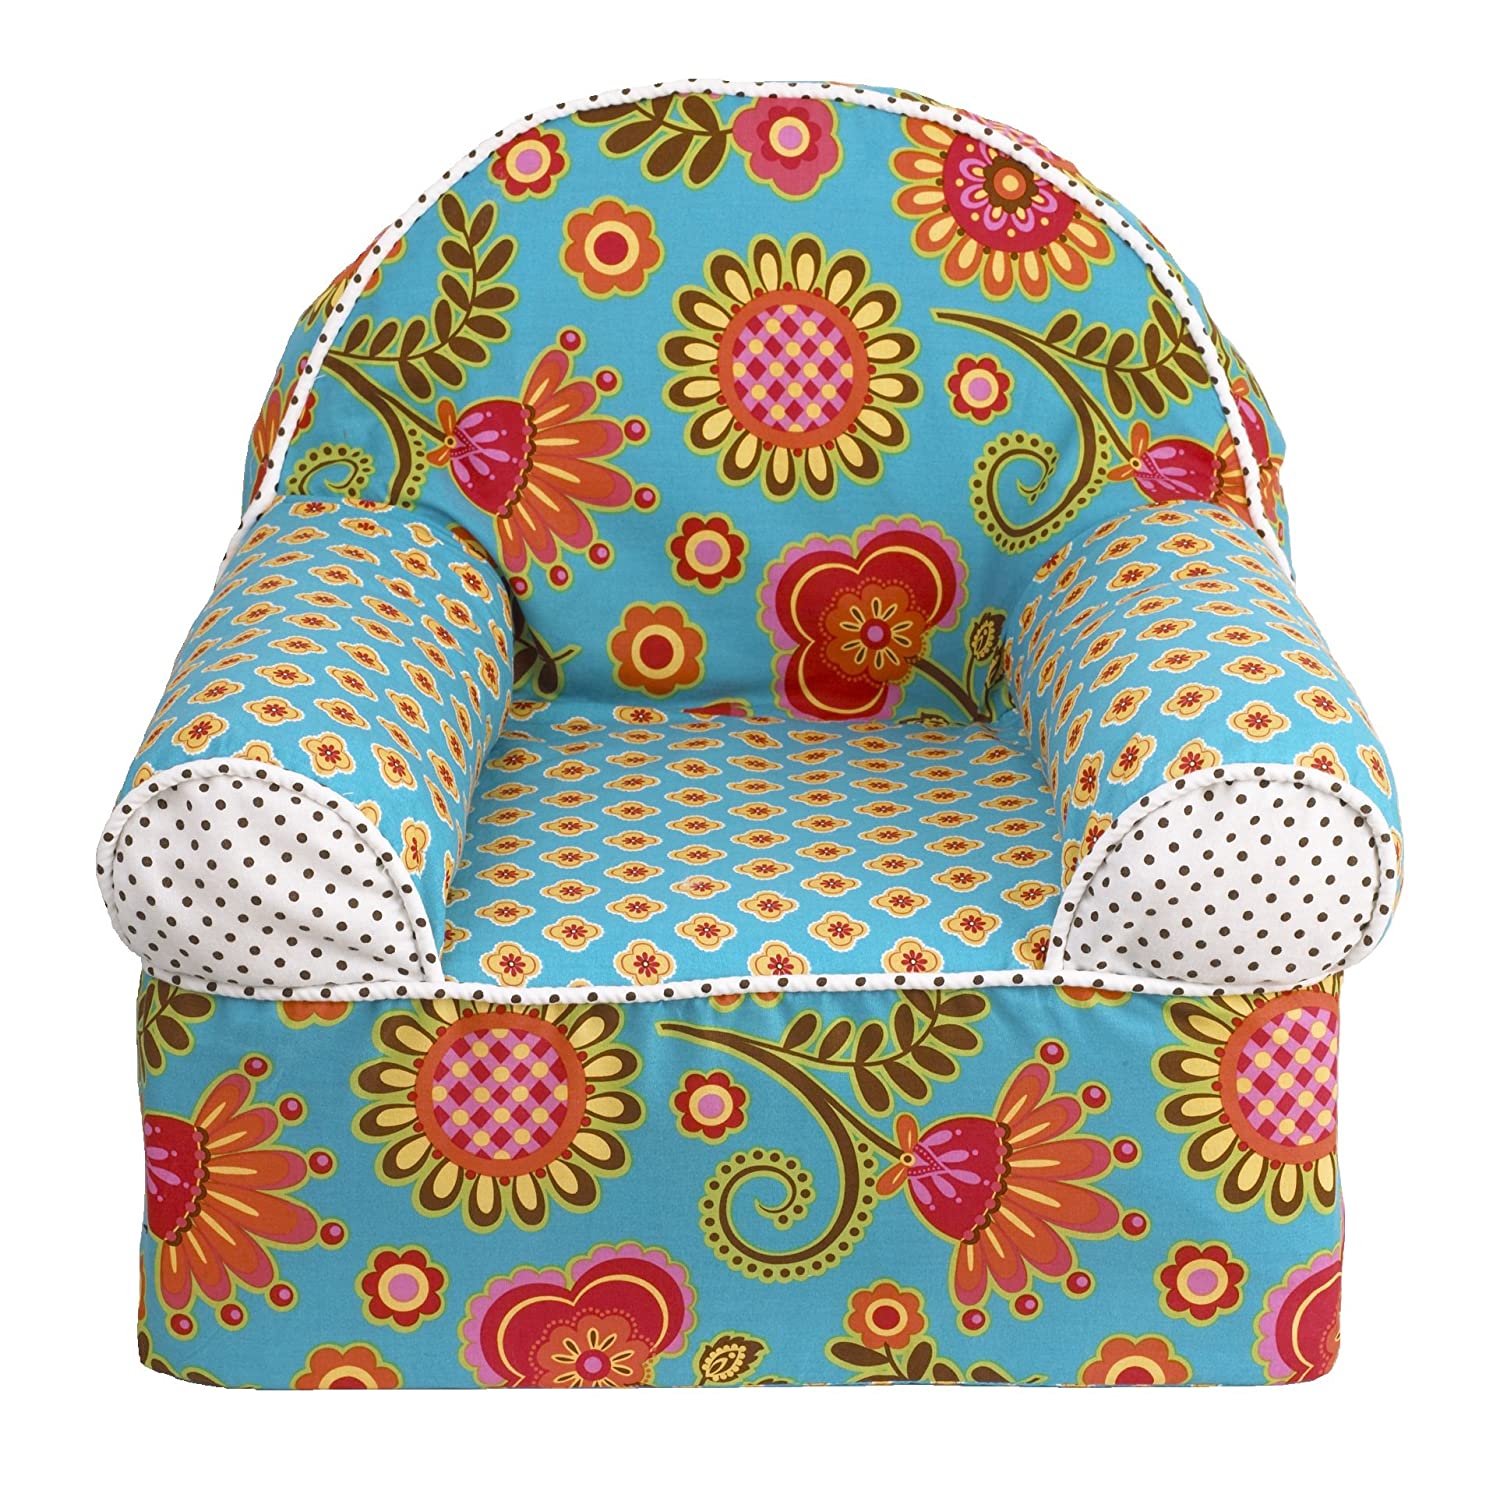 Cotton Tale Designs Gypsy Chair, Turquoise/Red/Orange/Yellow (GPCH)
